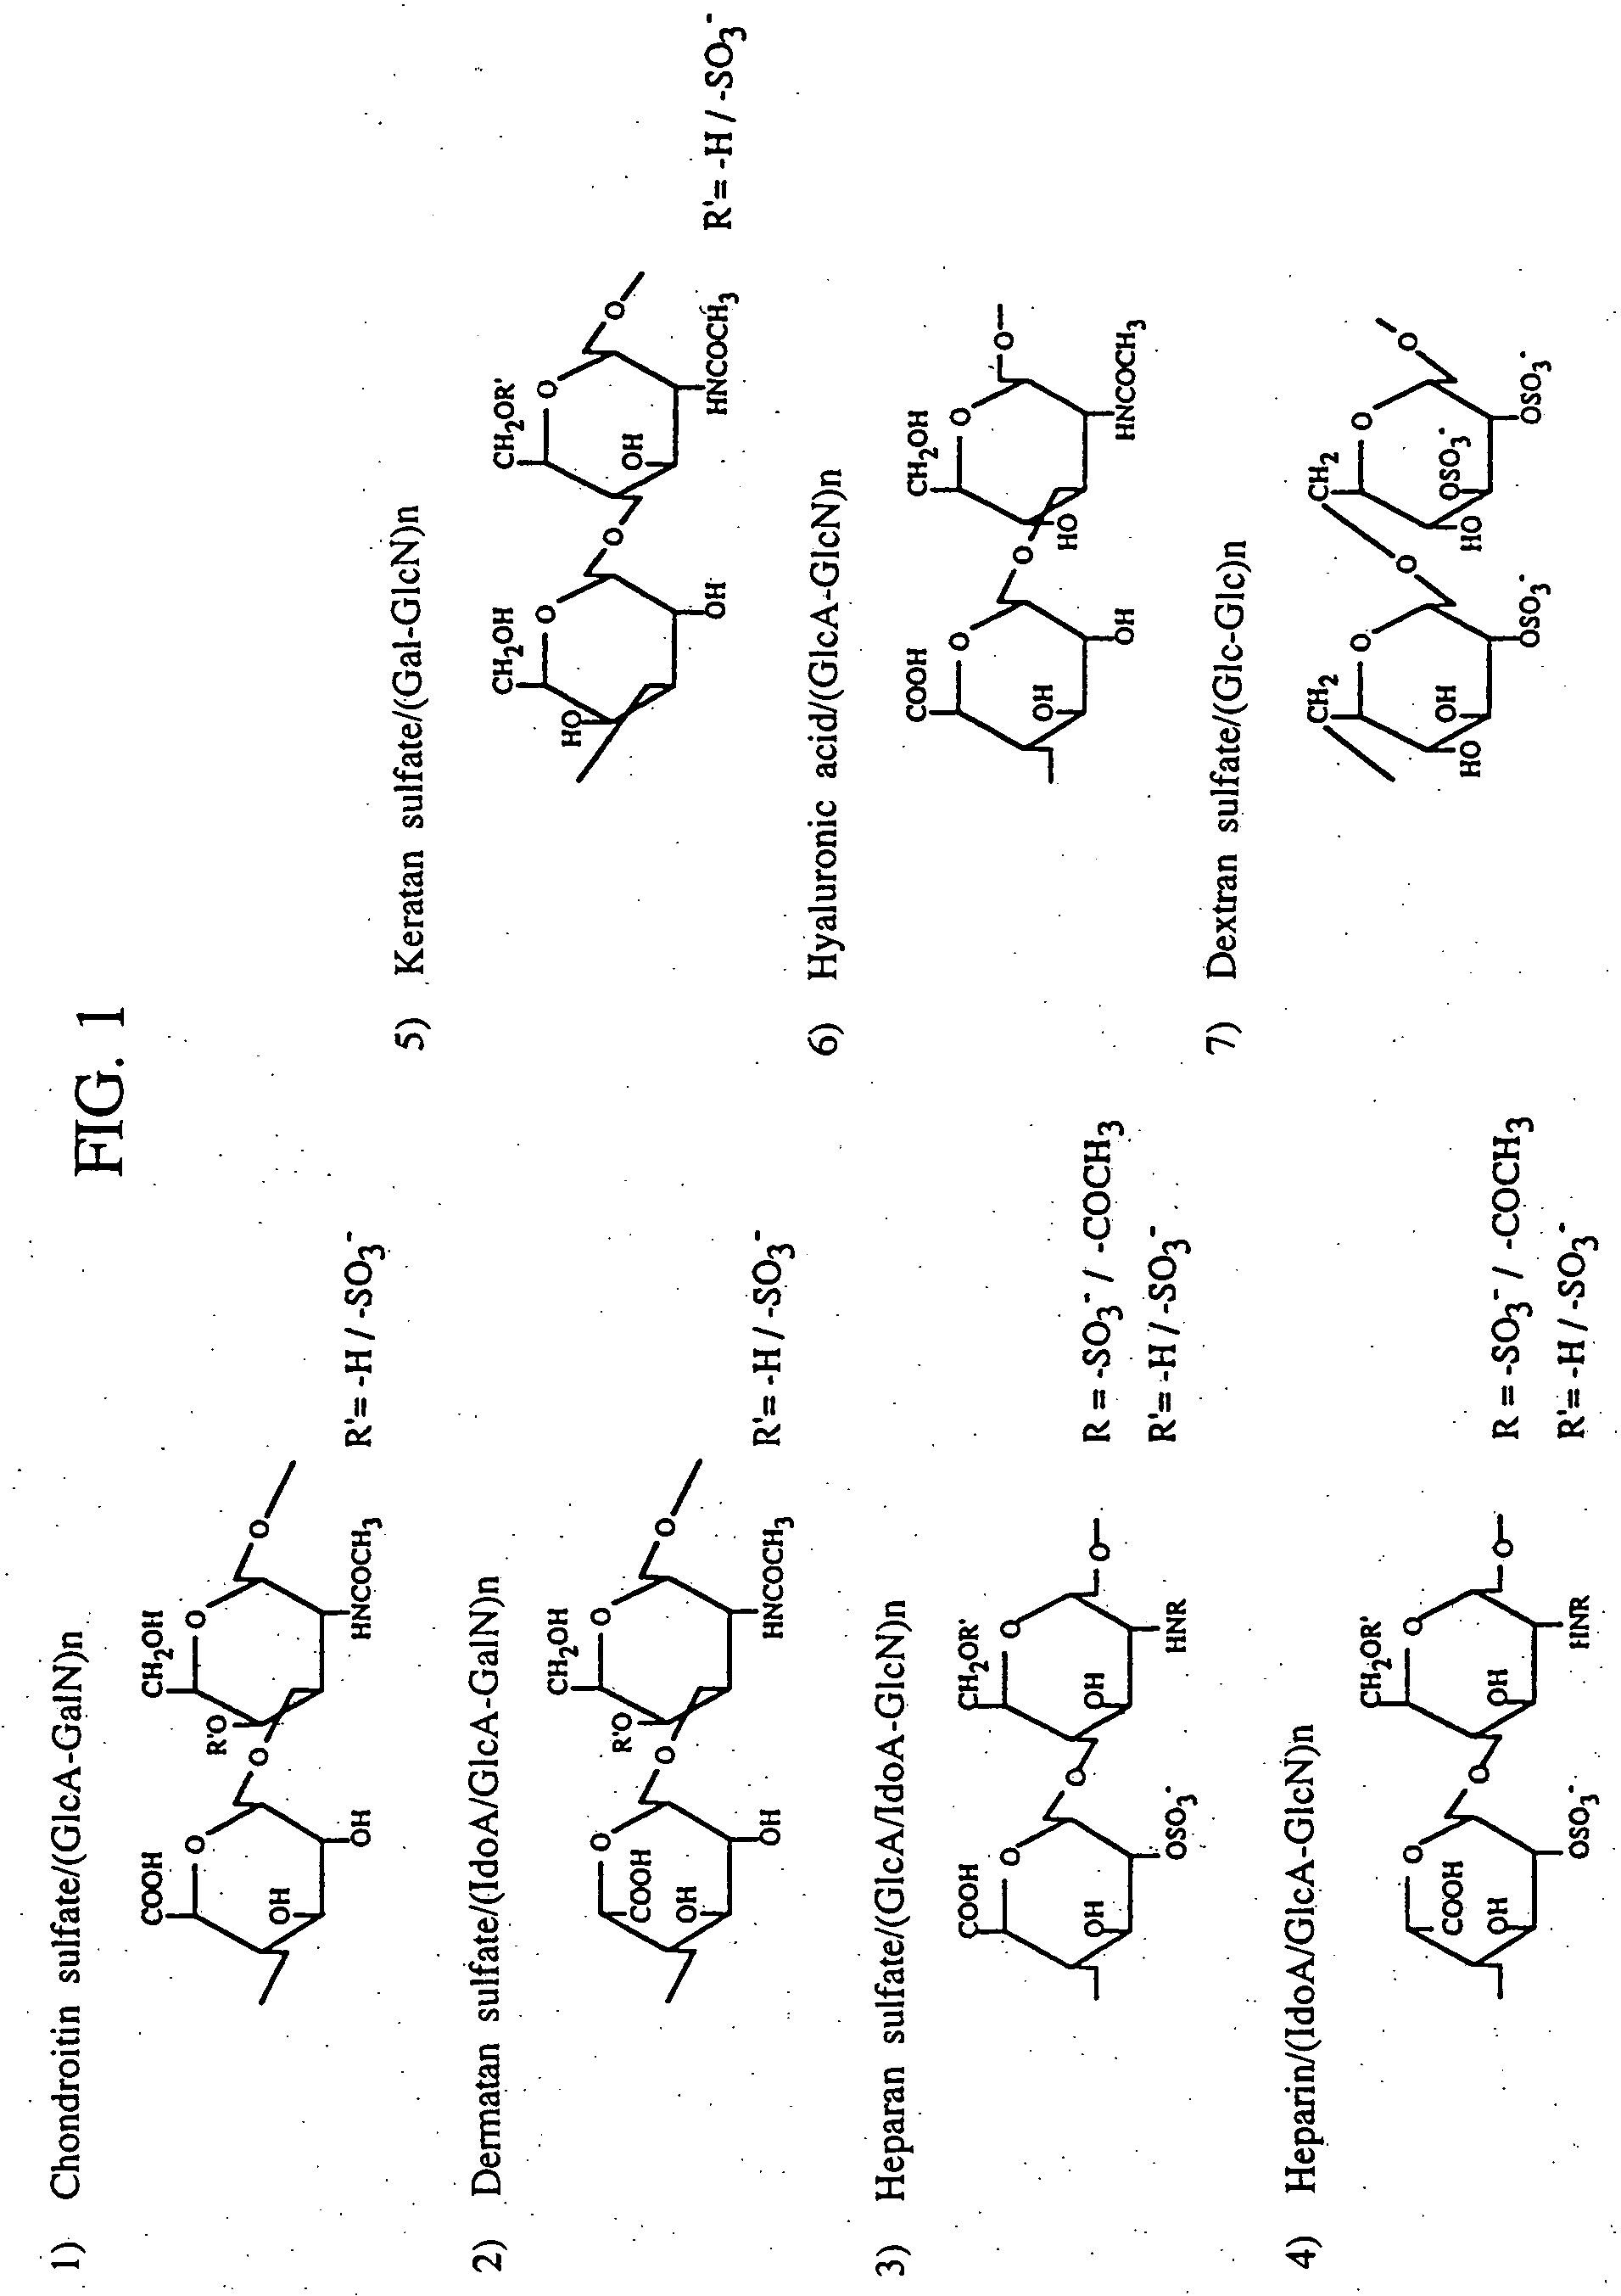 Heparin-binding proteins modified with sugar chains, method of producing the same and pharmaceutical compositions containing same